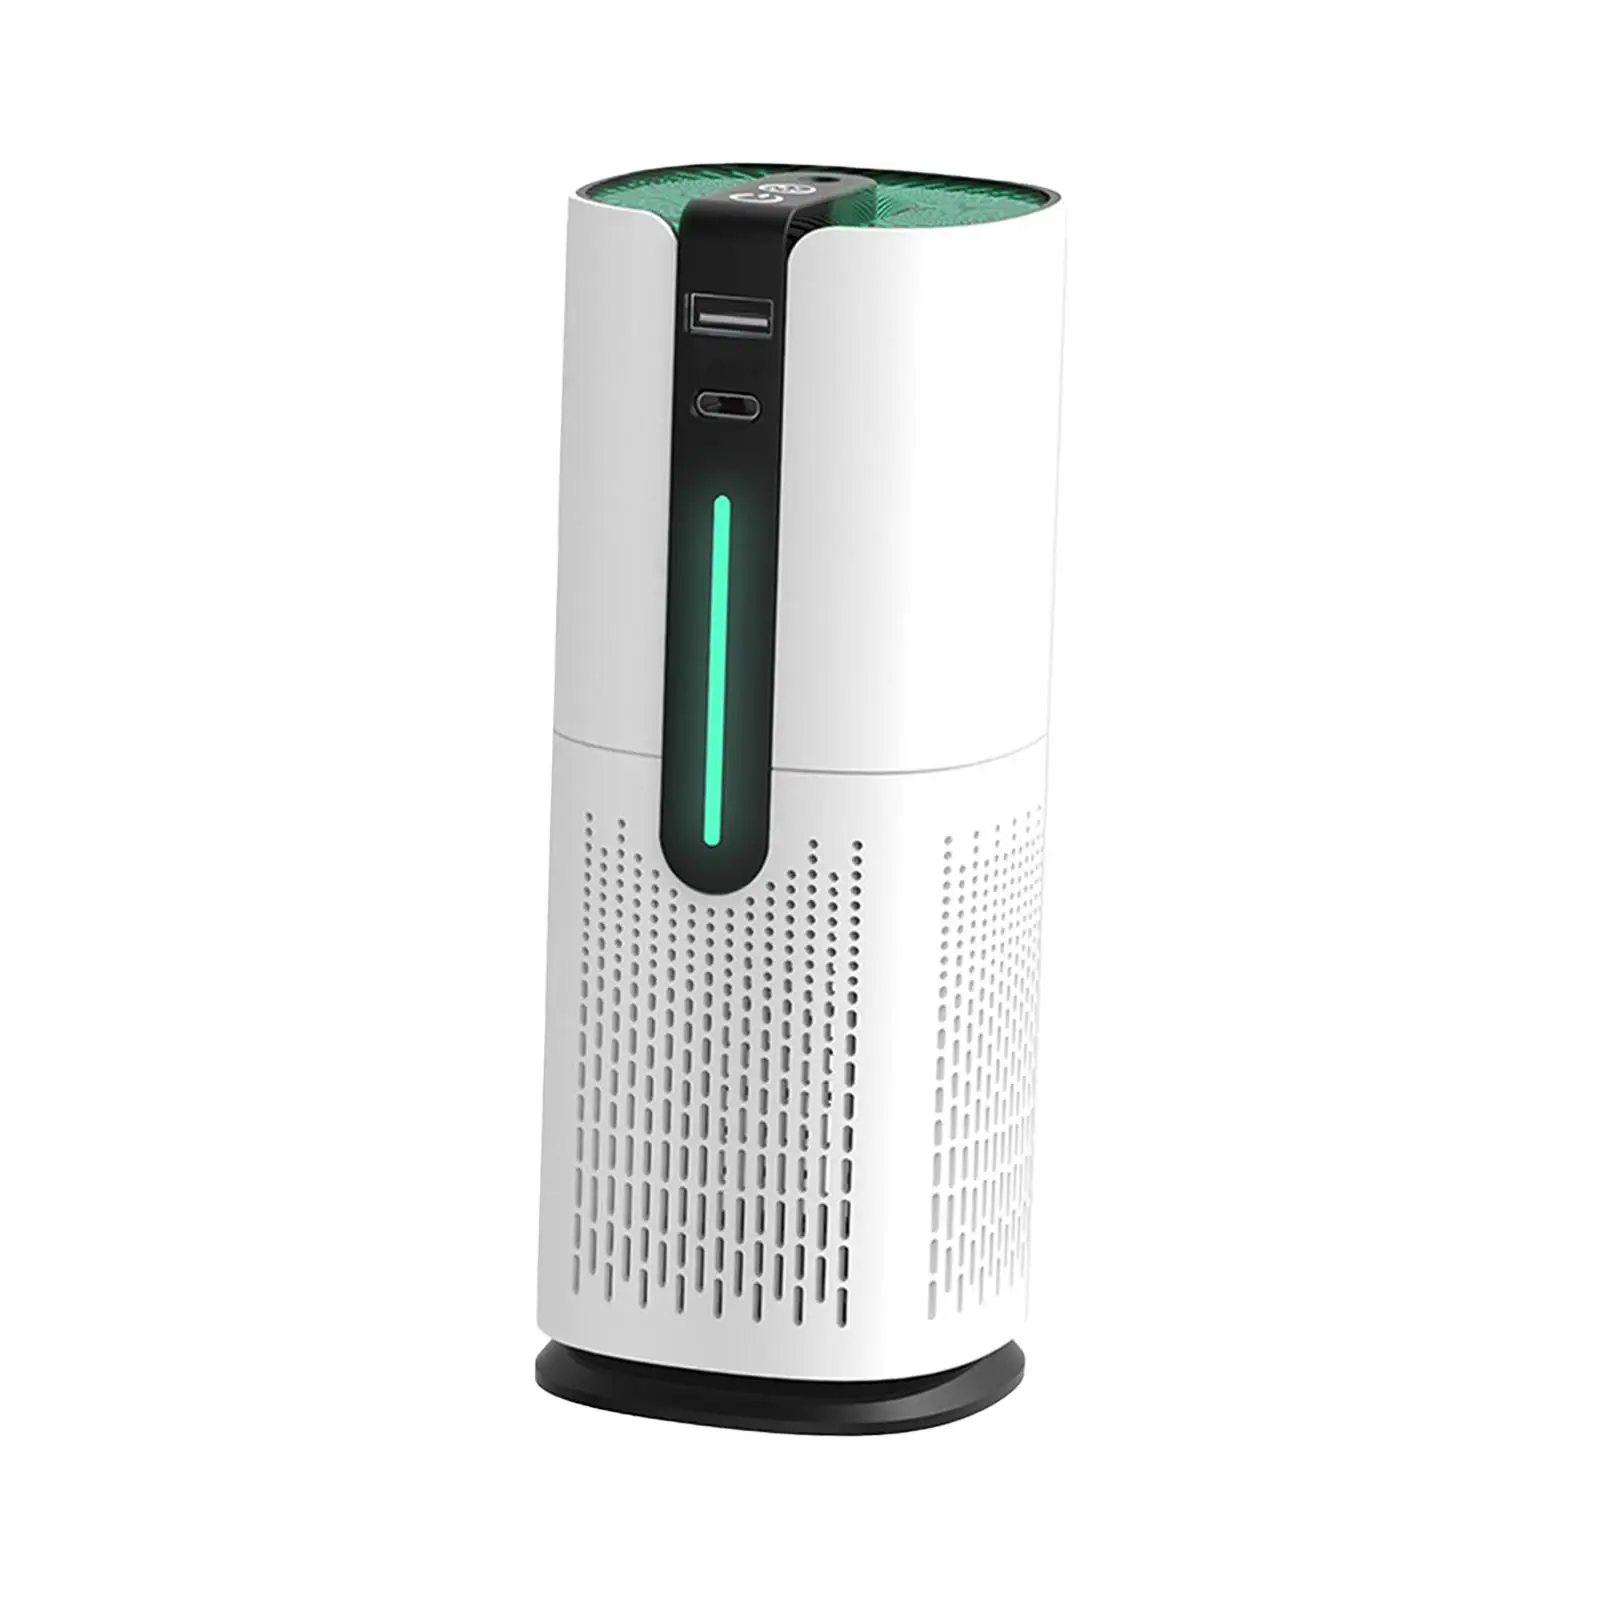 Mini Air Purifier Silent Home Air Purification Remove Odors Smoke Dust Indoor Desktop Air Freshener with Starry Atmosphere Light